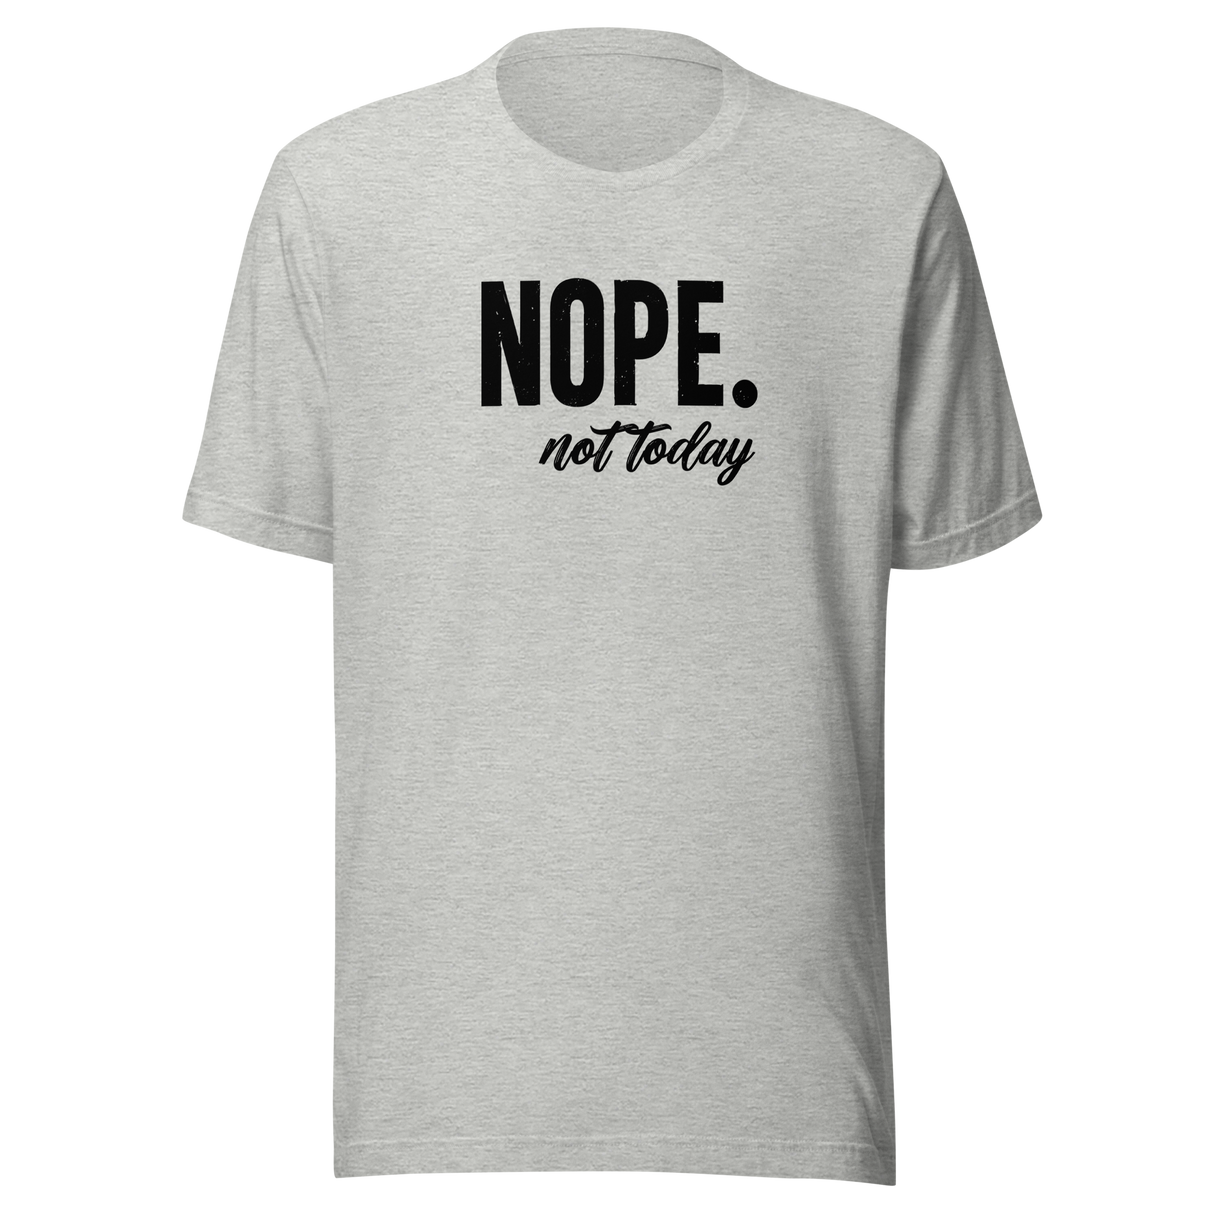 Nope Not Today - Life Tee - Happiness T-Shirt - Empowerment Tee - Boldness T-Shirt - Courage Tee